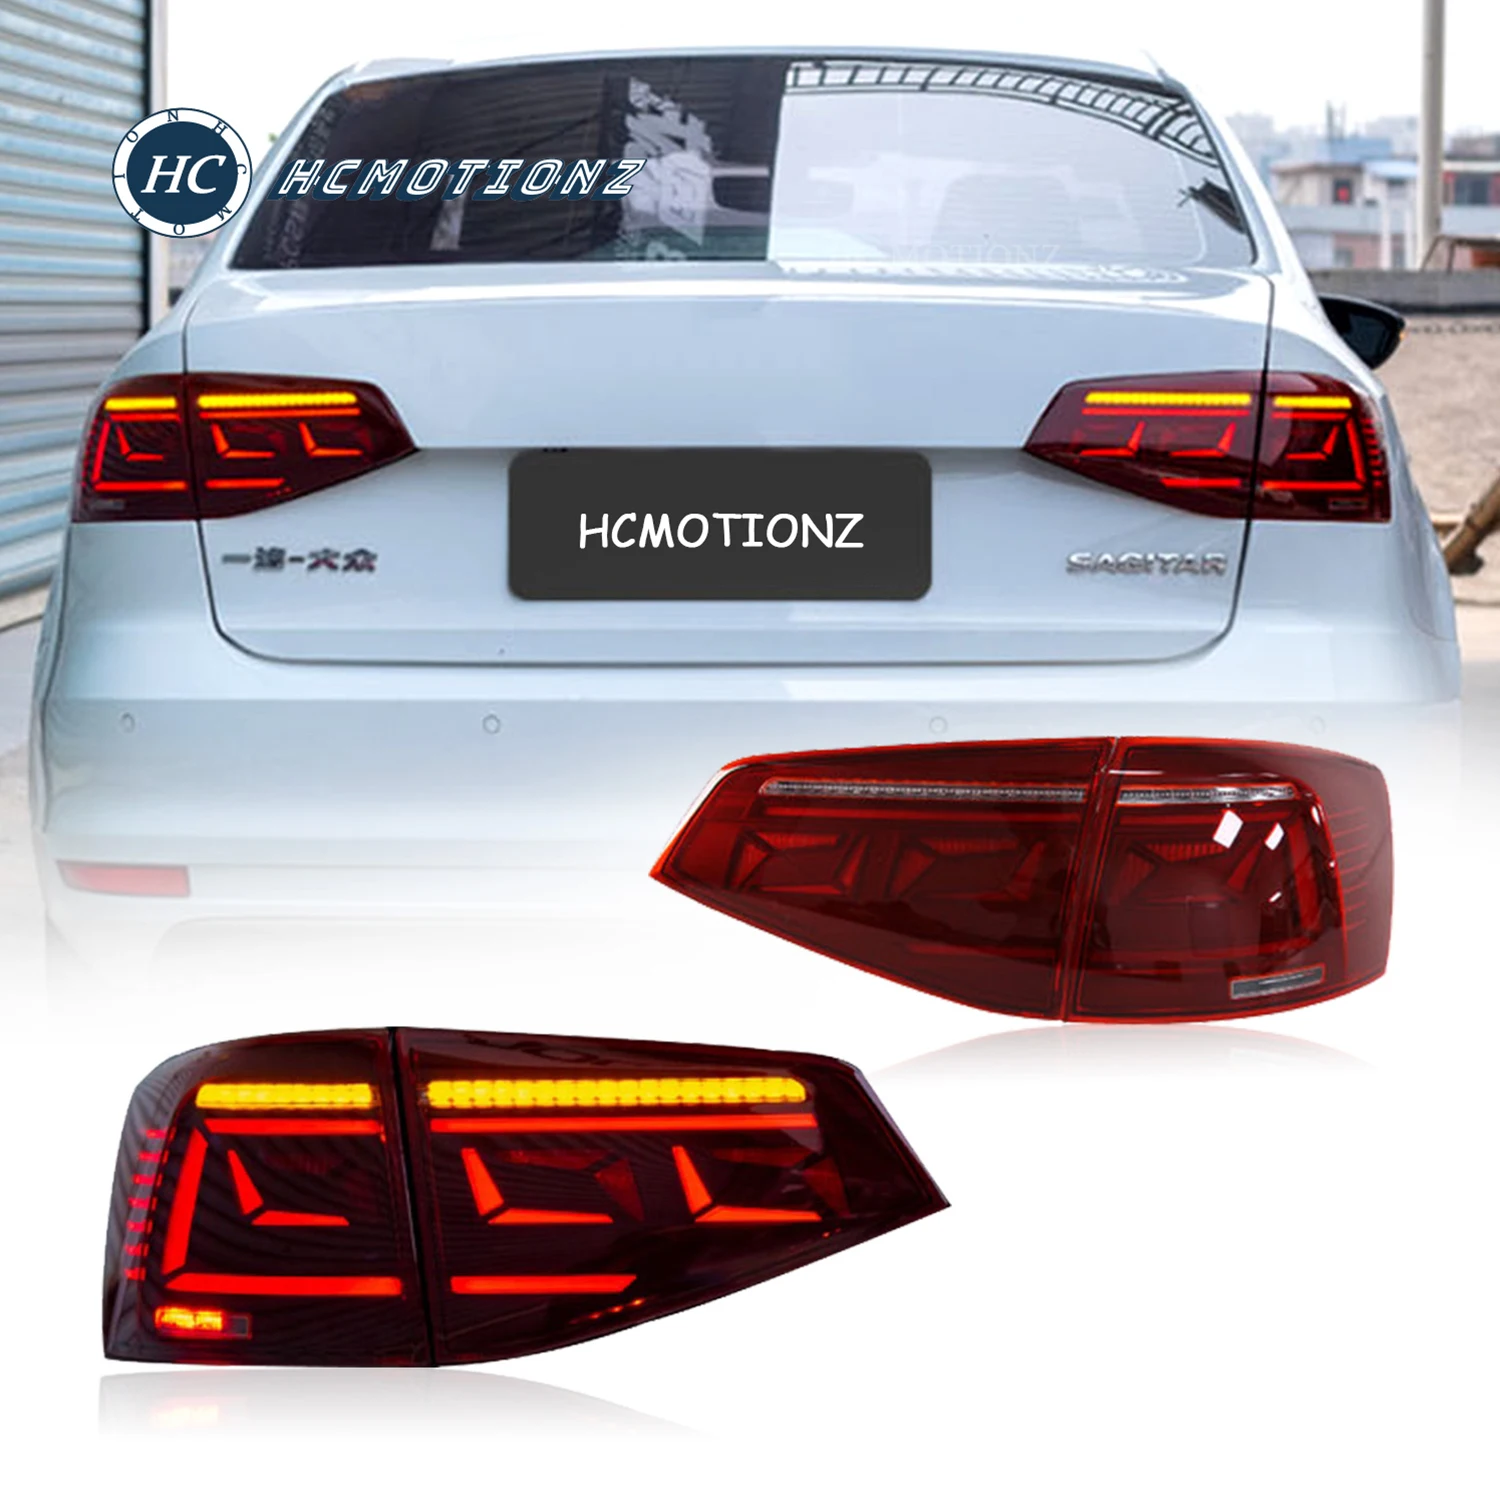 HCmotion LED Tail Light 2015 2016 2017 2018 for VW Jetta MK6 Sagitar Vento Back Rear Lamp DRL Signal Light Back Lamp Accessories